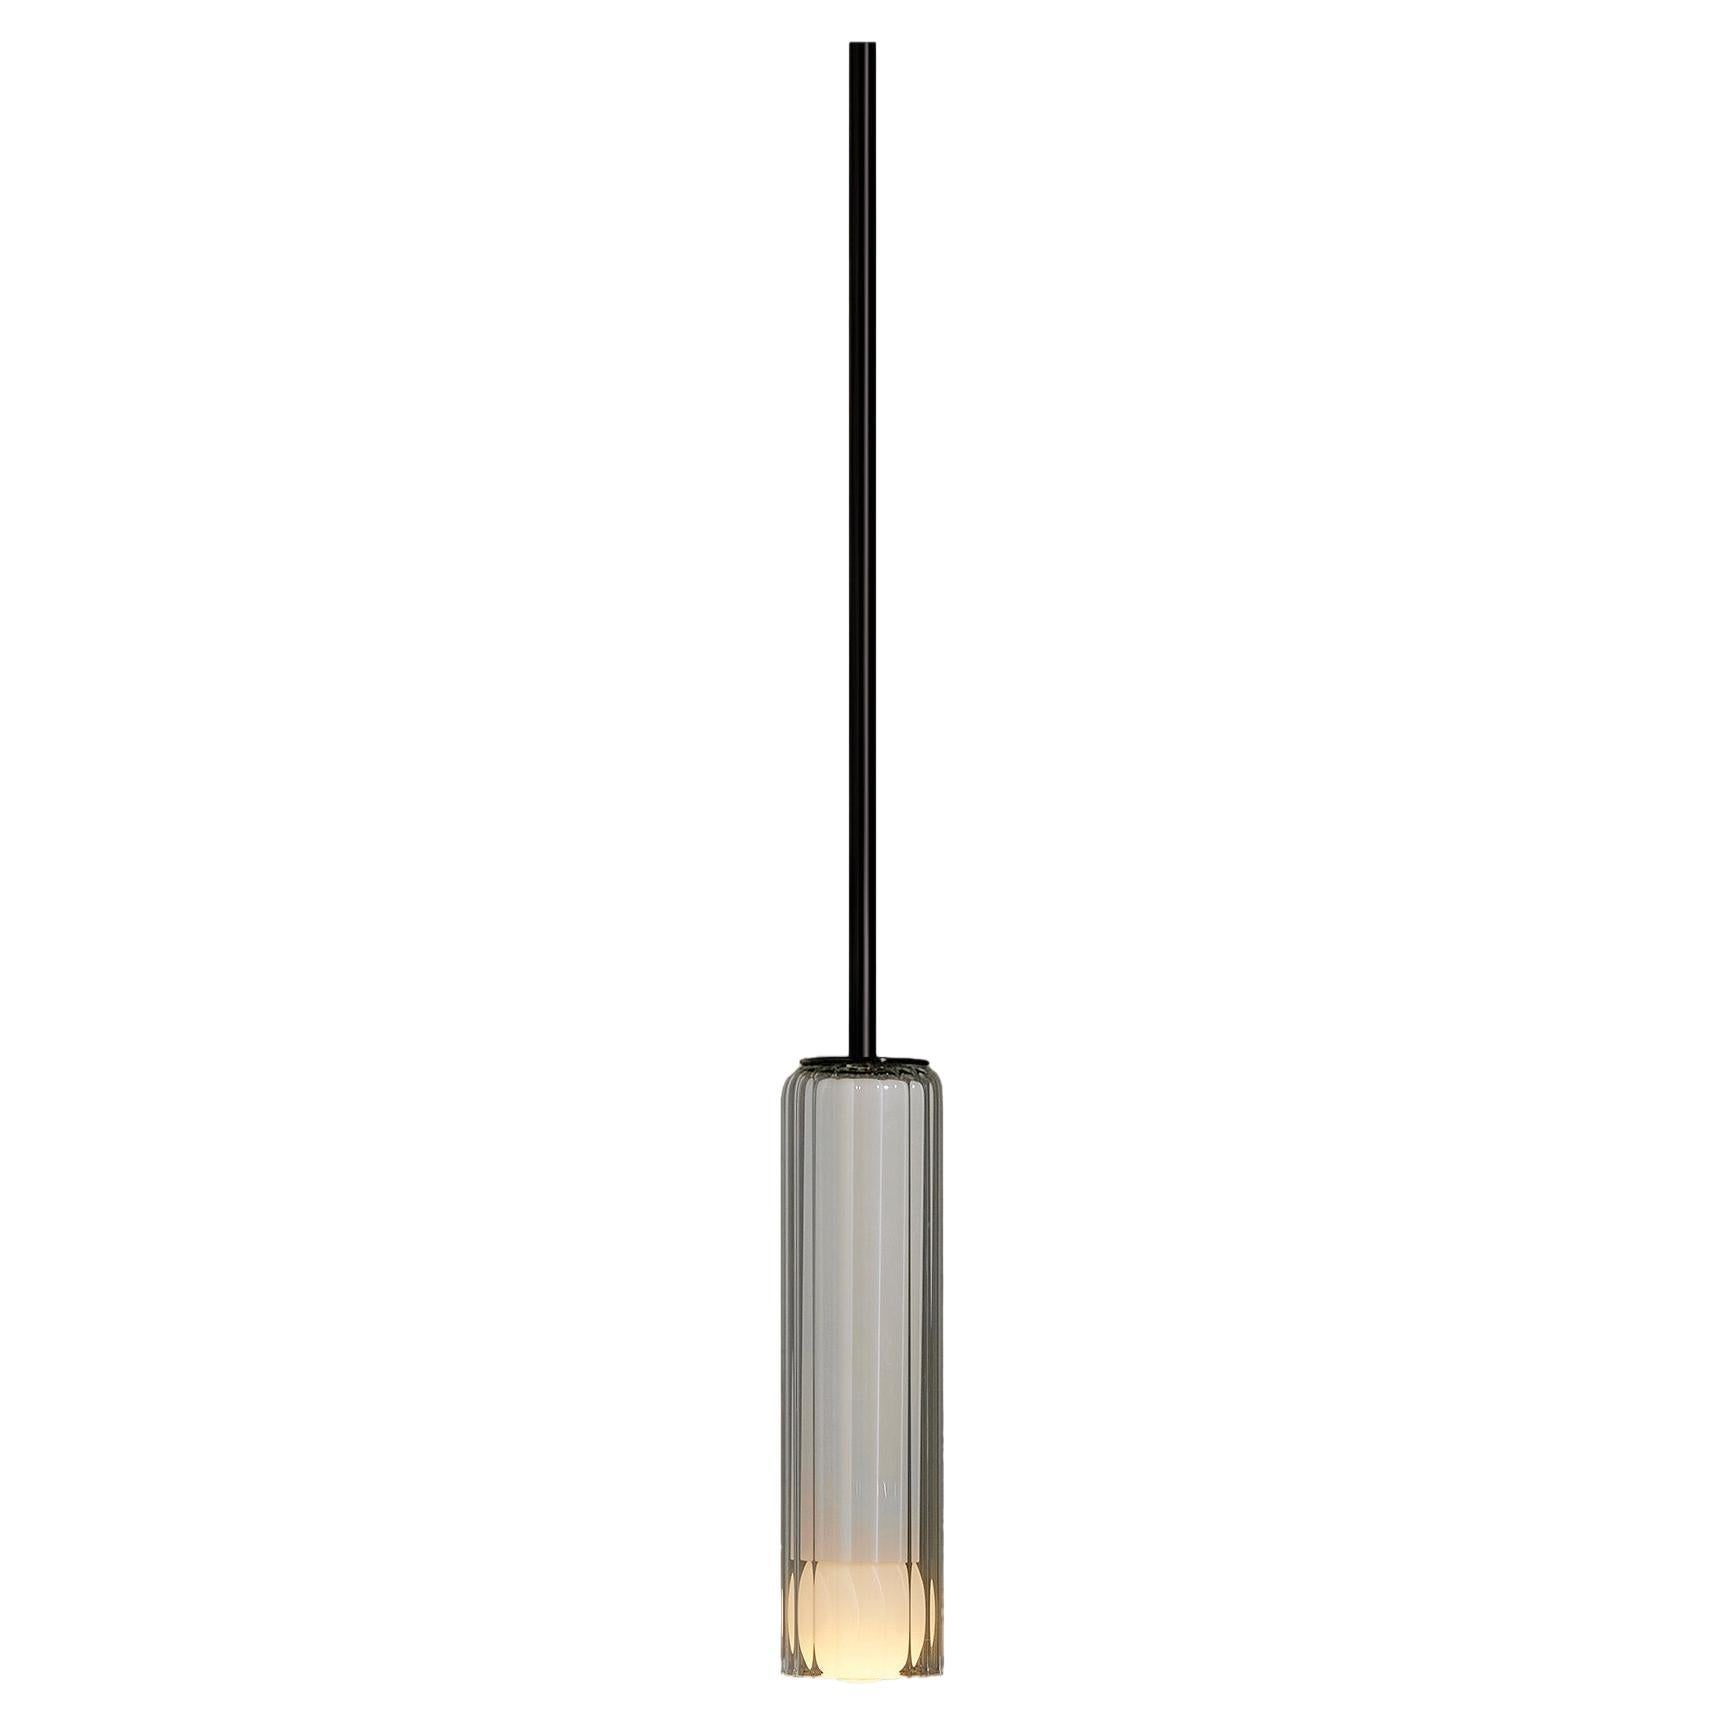 Marz Designs, "Lini Pendant Light, Short with Solid Rod", Fluted Glass Pendant